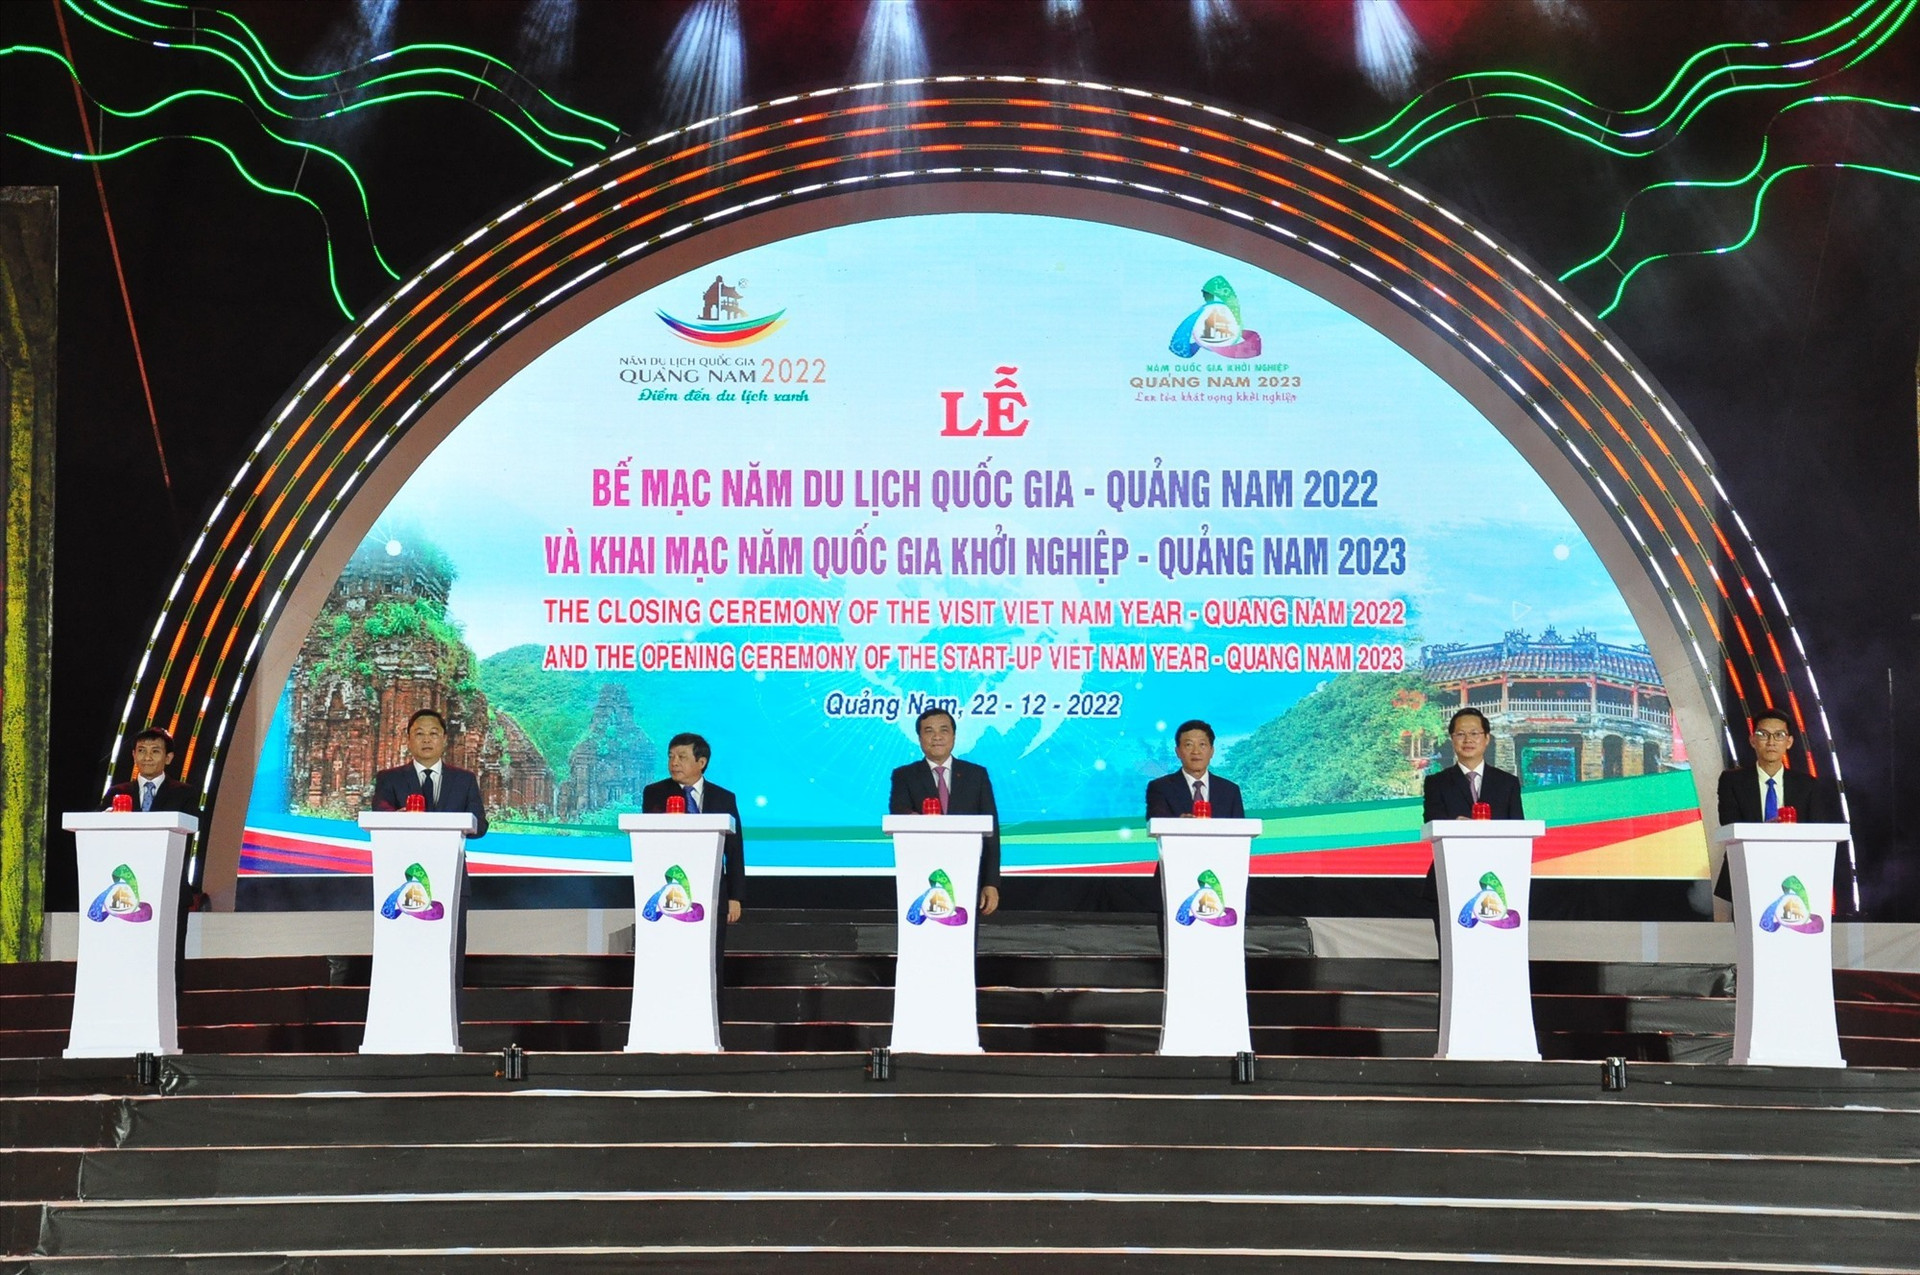 Opening the National Start-up Year - Quang Nam 2023